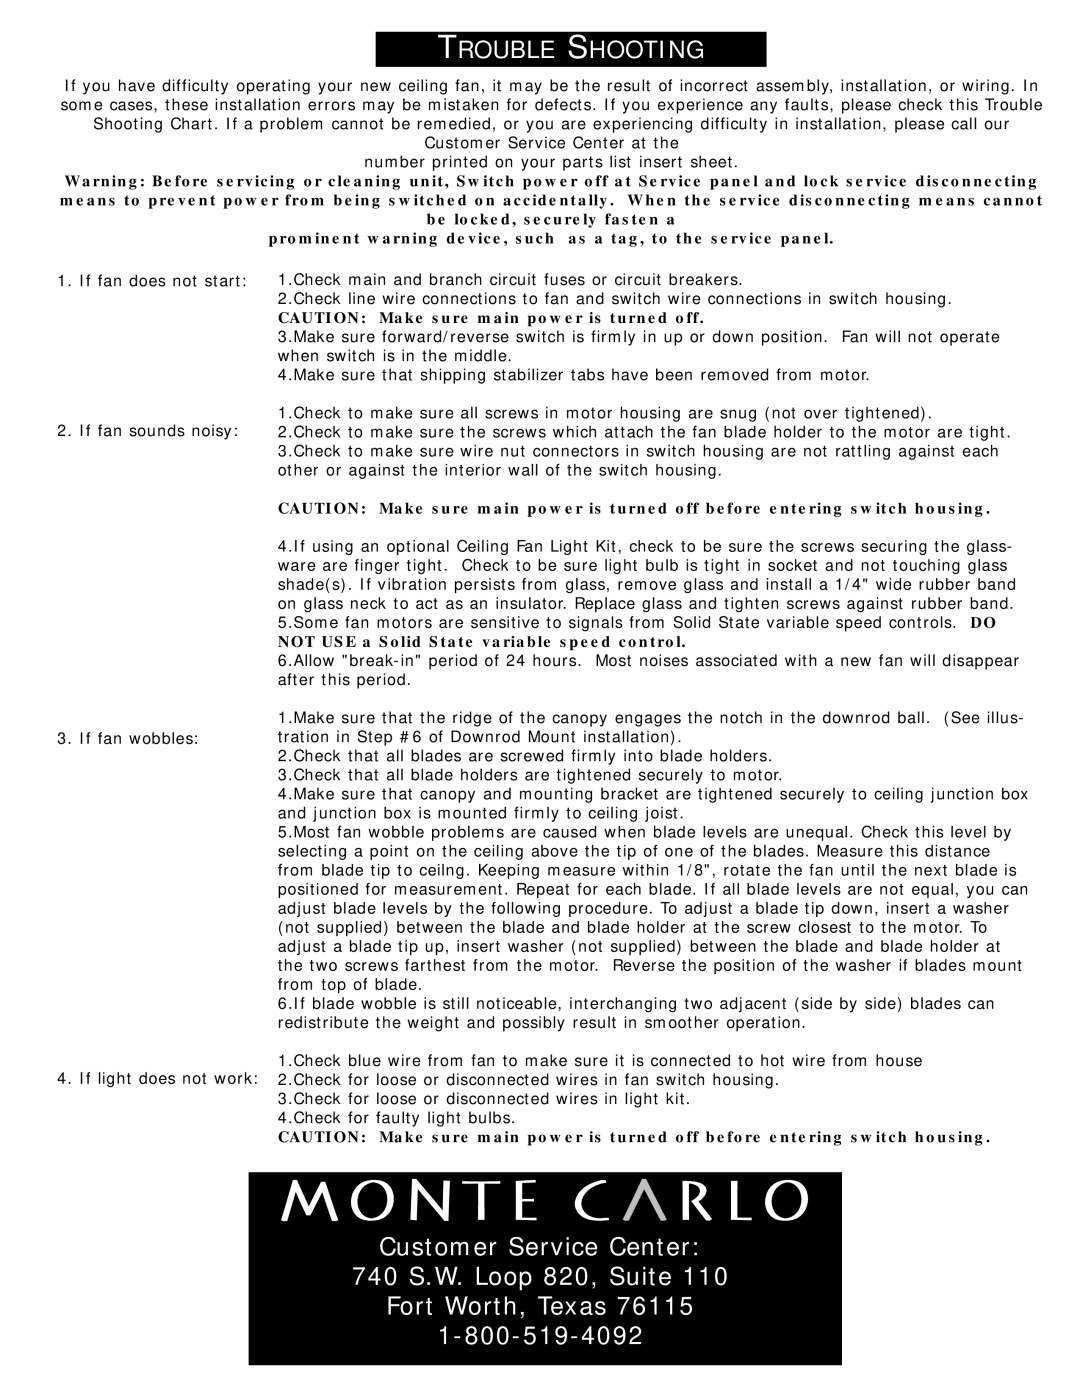 Monte Carlo Fan Company 5WF52XXD installation instructions Rouble Hooting, Customer Service Center 740 S.W. Loop 820, Suite 